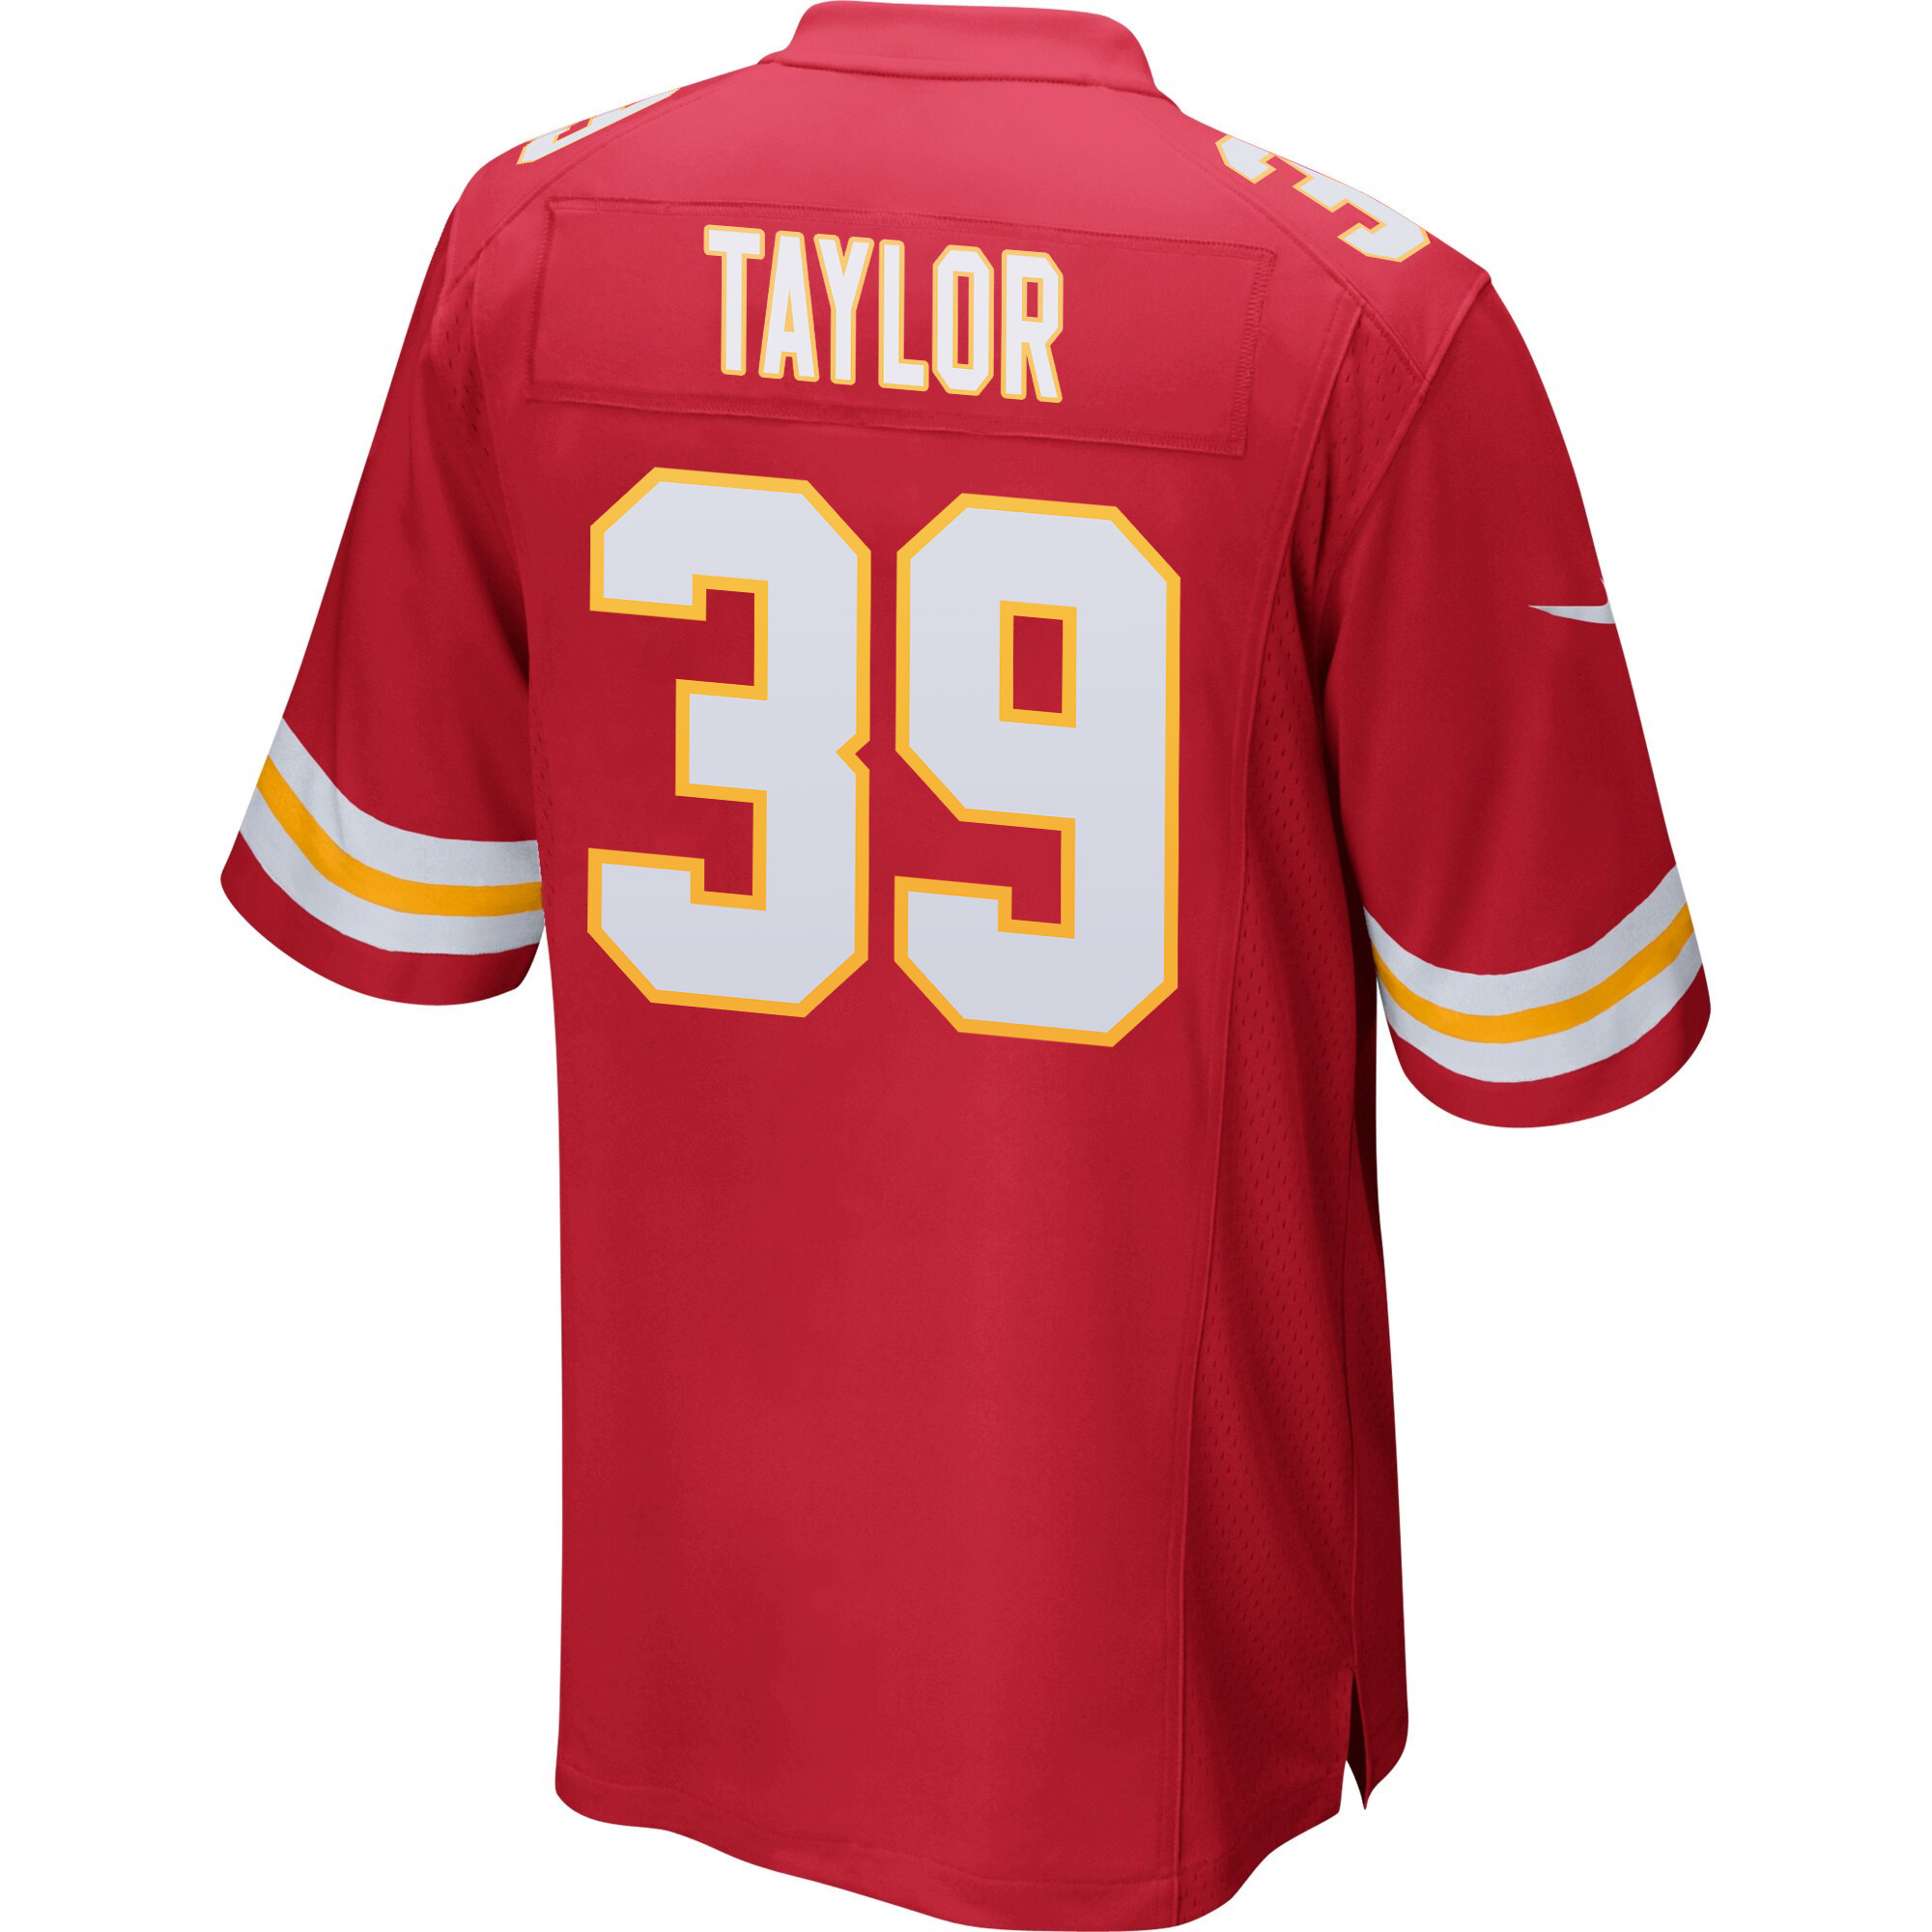 Keith Taylor 39 Kansas City Chiefs Super Bowl LVIII Champions 4X Game Men Jersey - Red